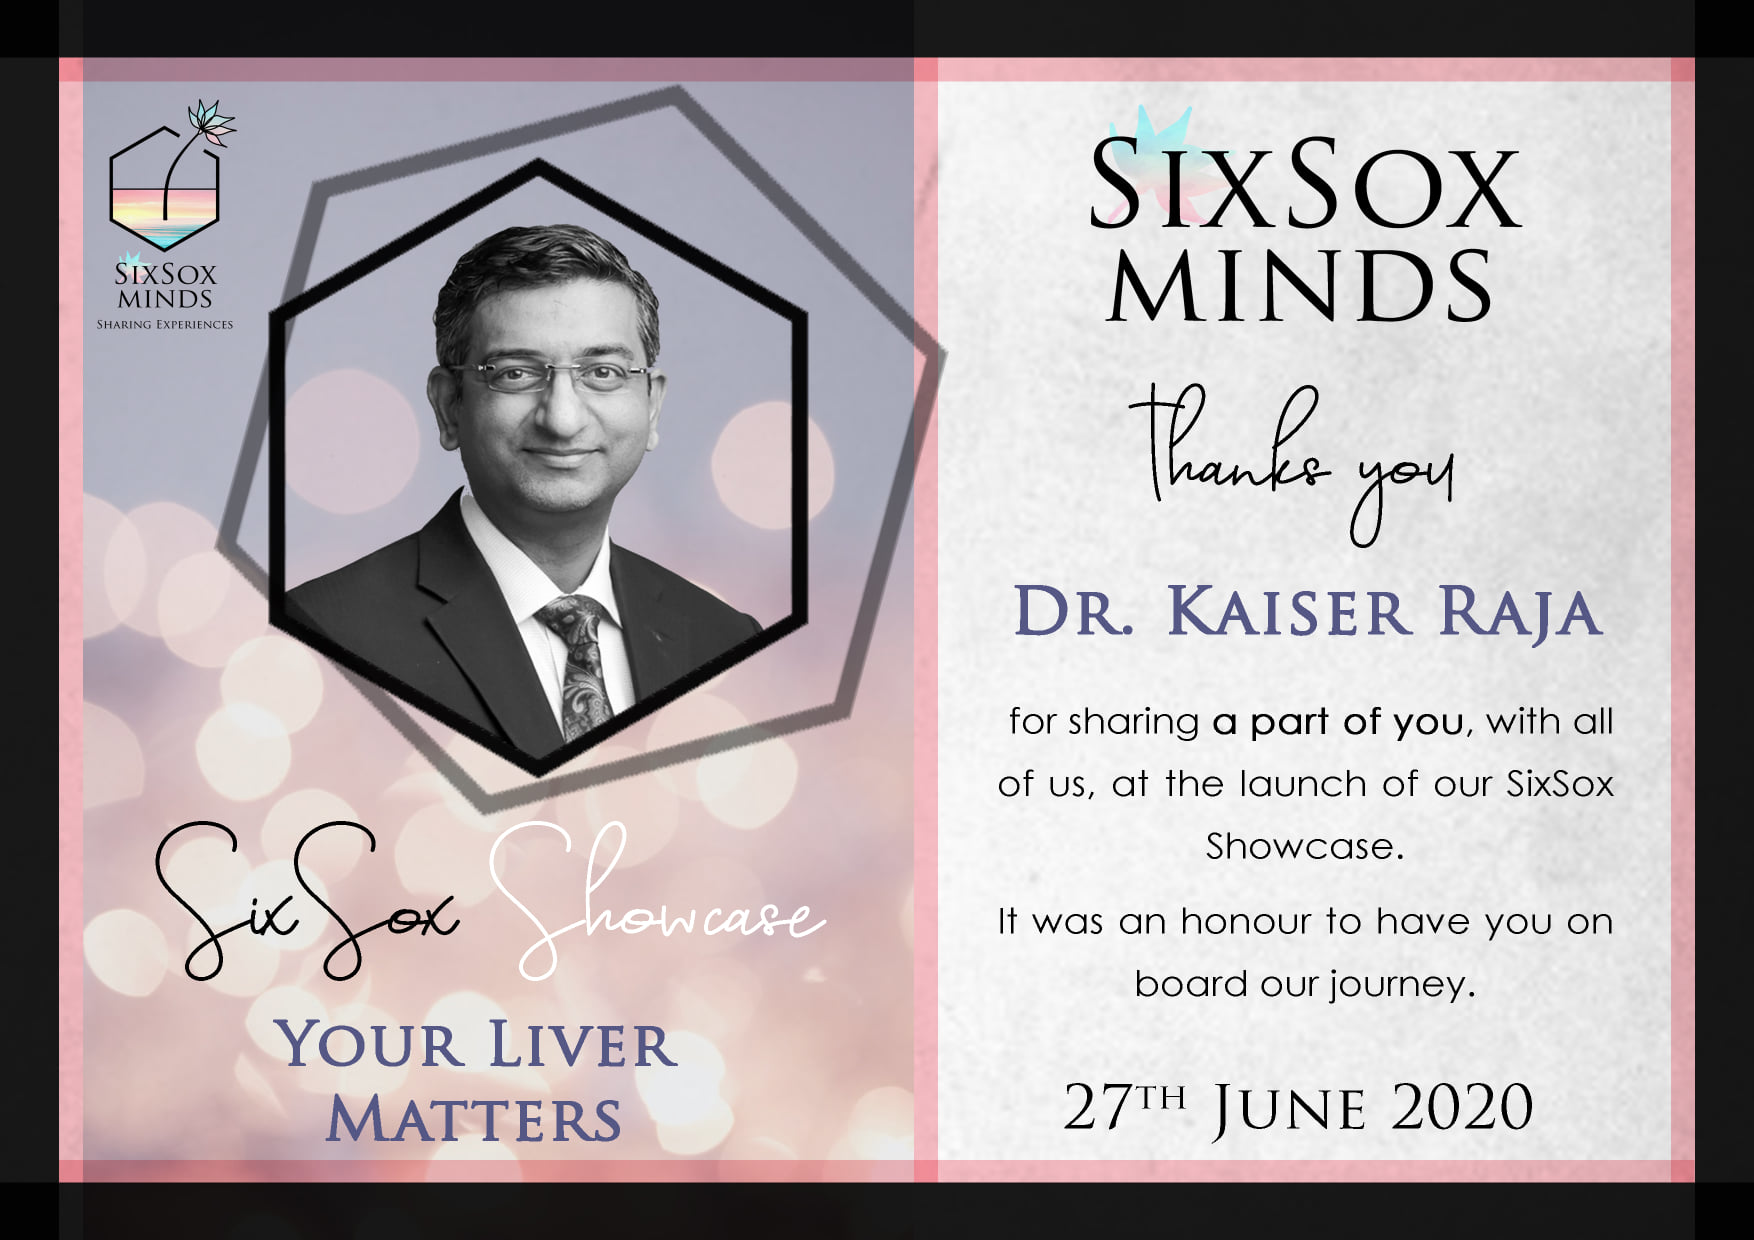 Dr Kaiser Raja for sharing a part of you, with all of us, at the launch of our SixSox Showcae.